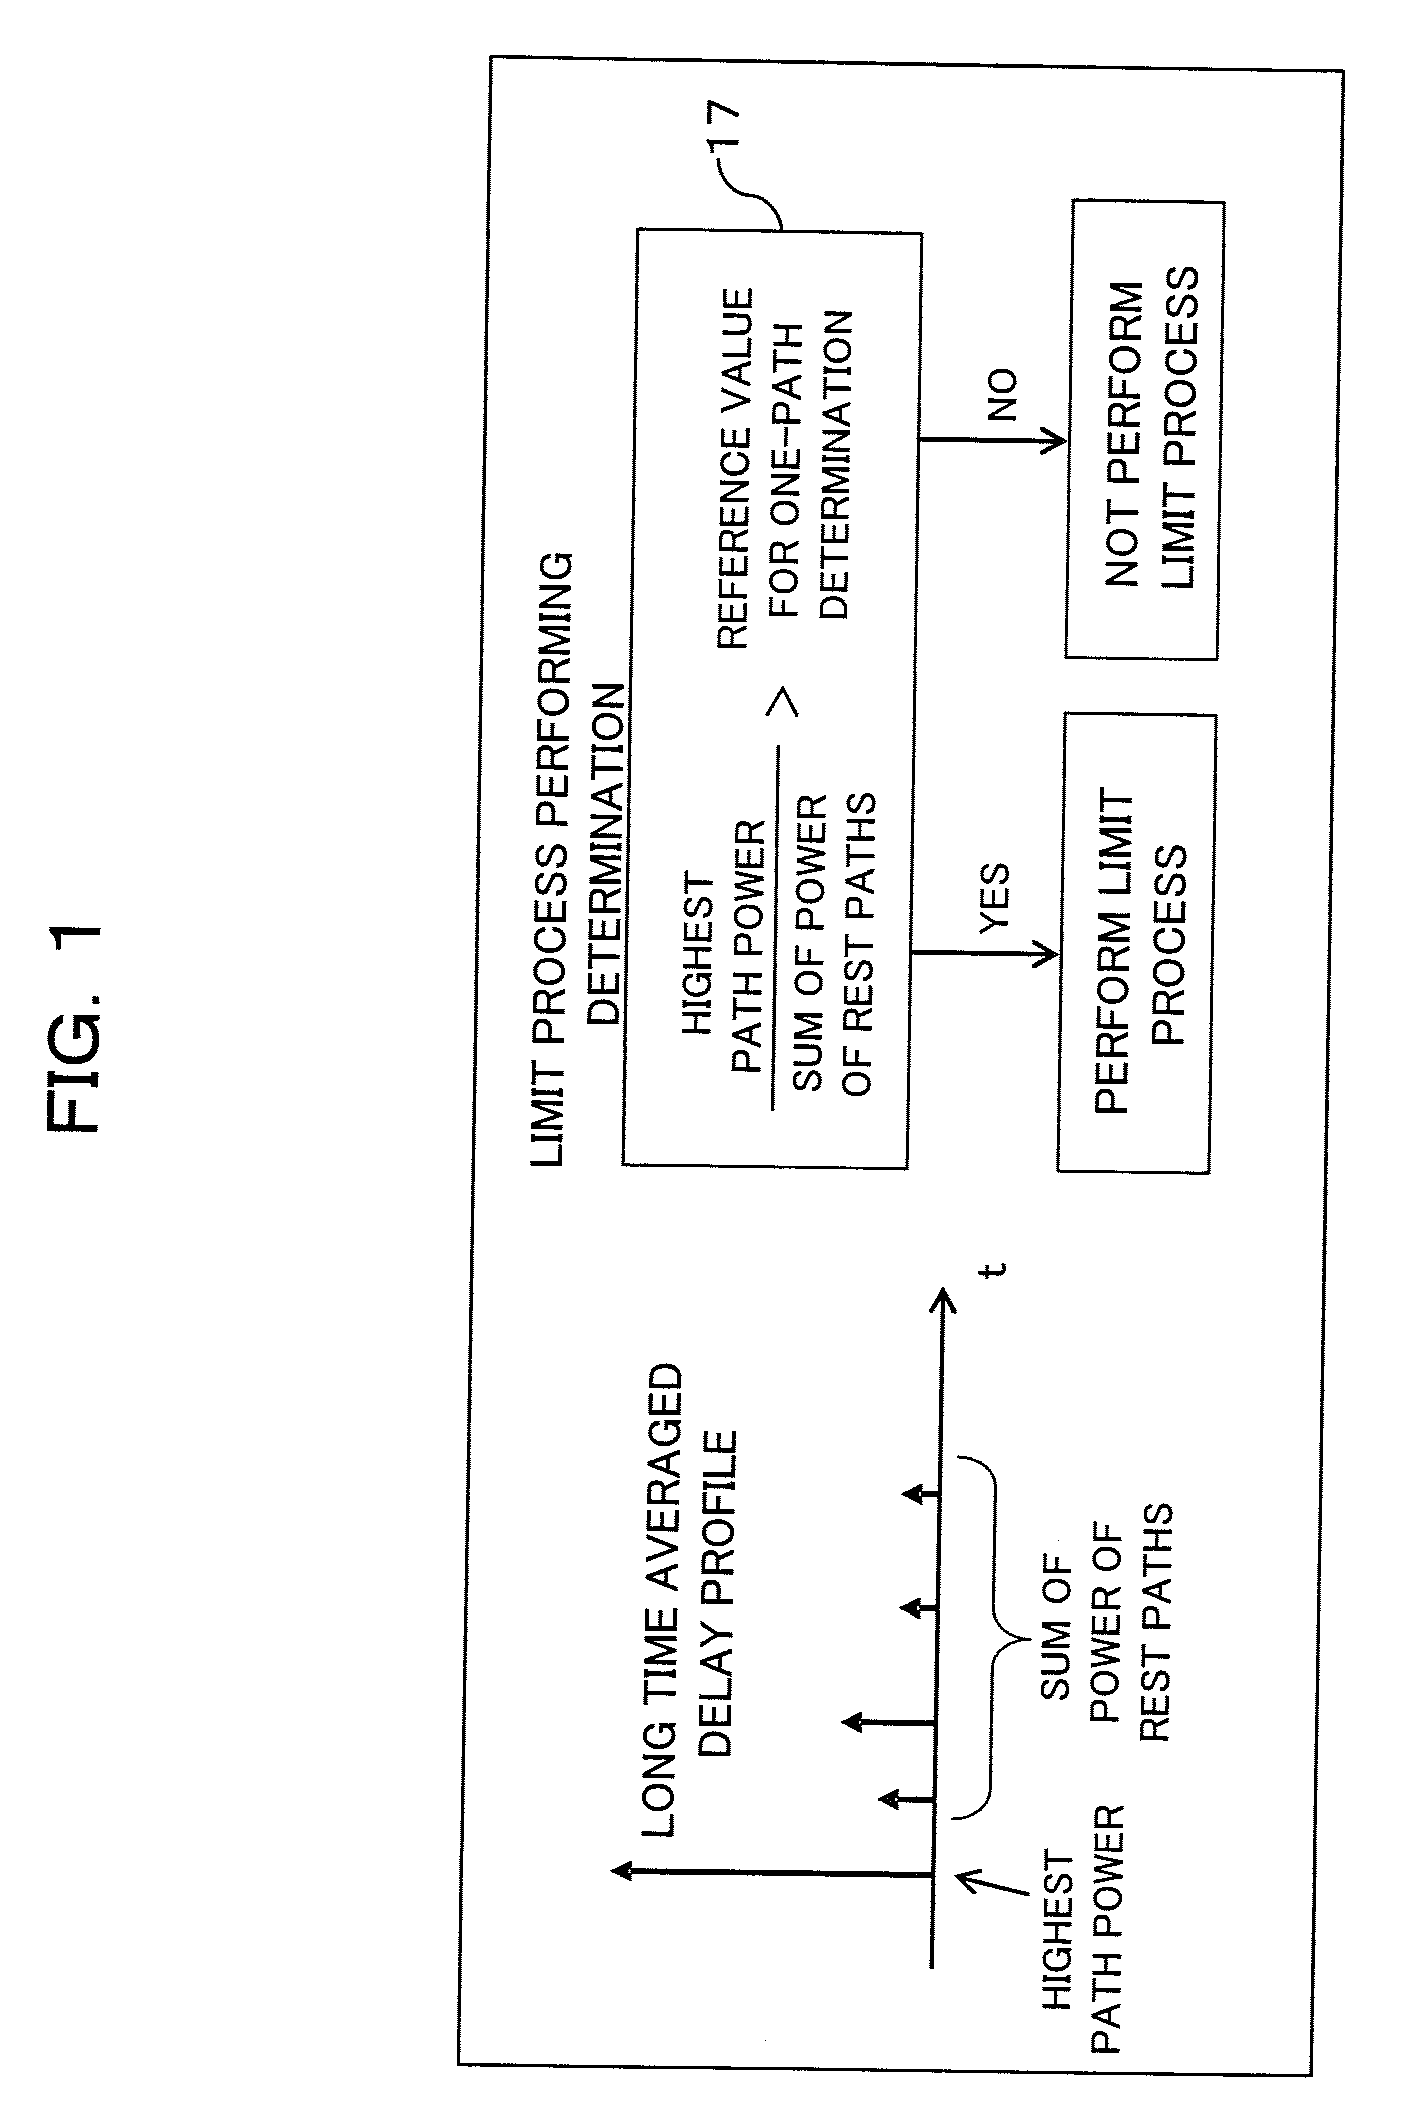 Receiver and Reception Processing Method